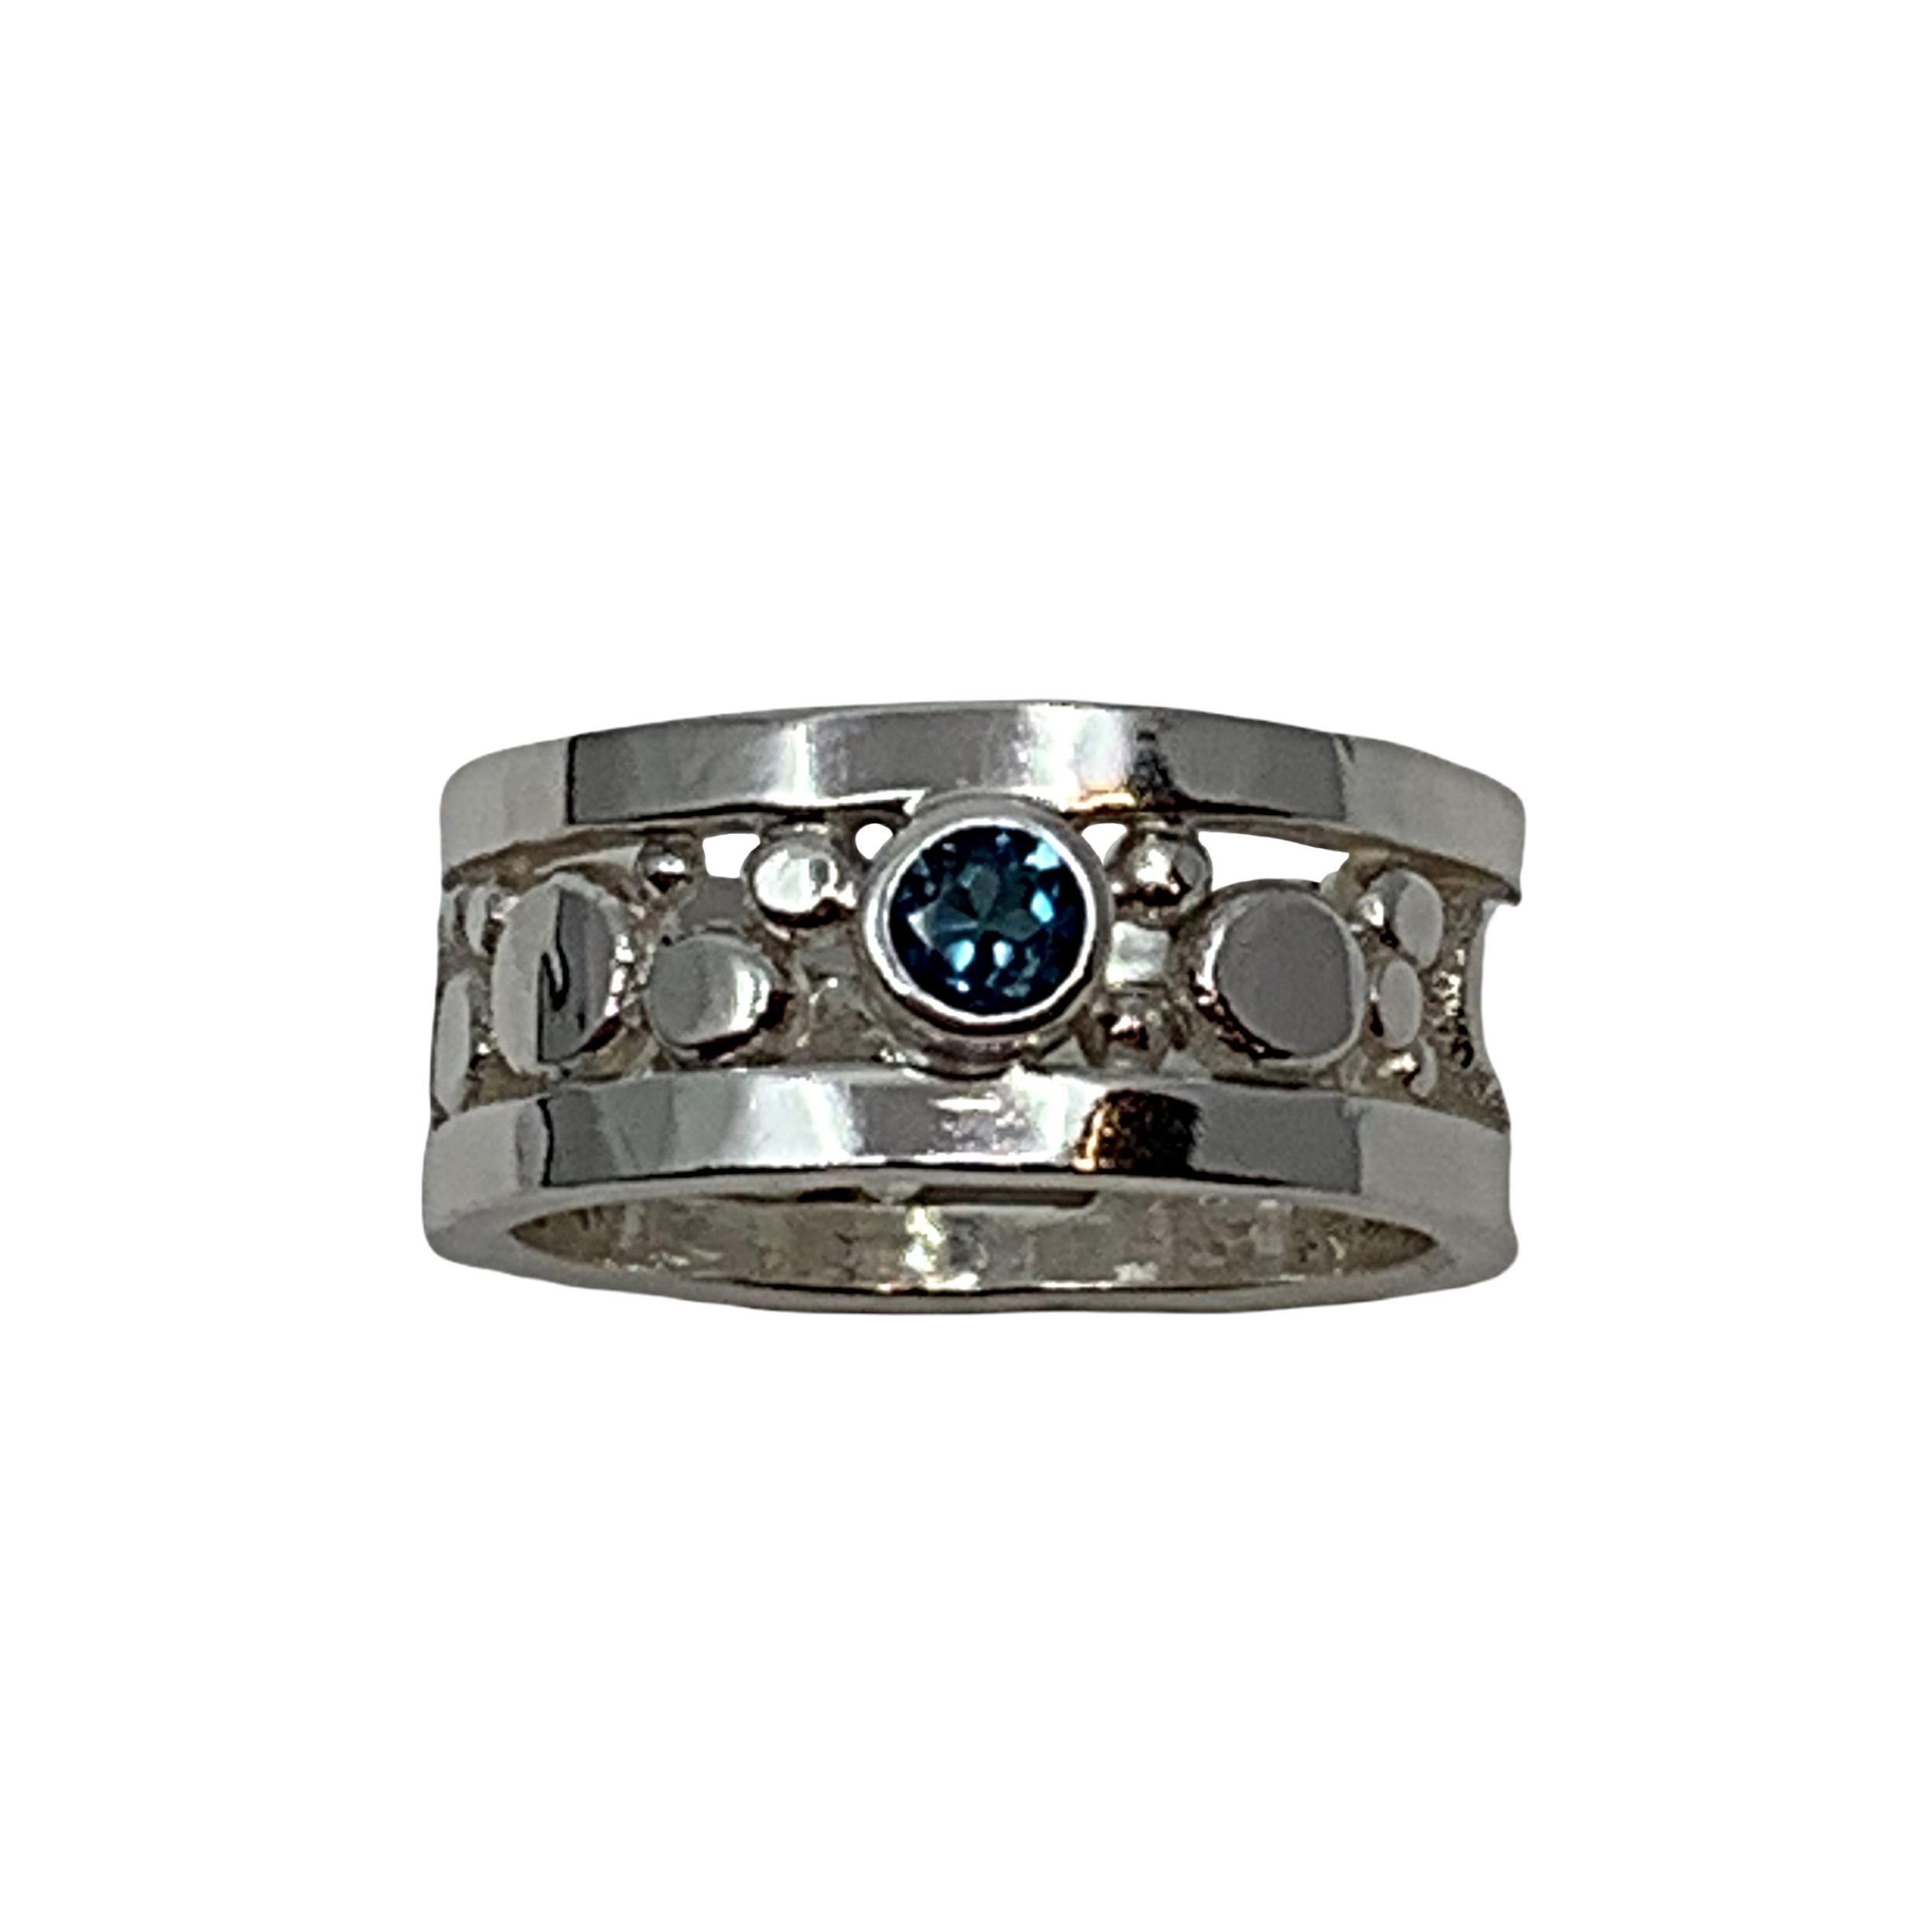 Handmade silver and 0.25ct London blue topaz ring by A&R Jewellery | Effusion Art Gallery + Cast Glass Studio, Invermere BC